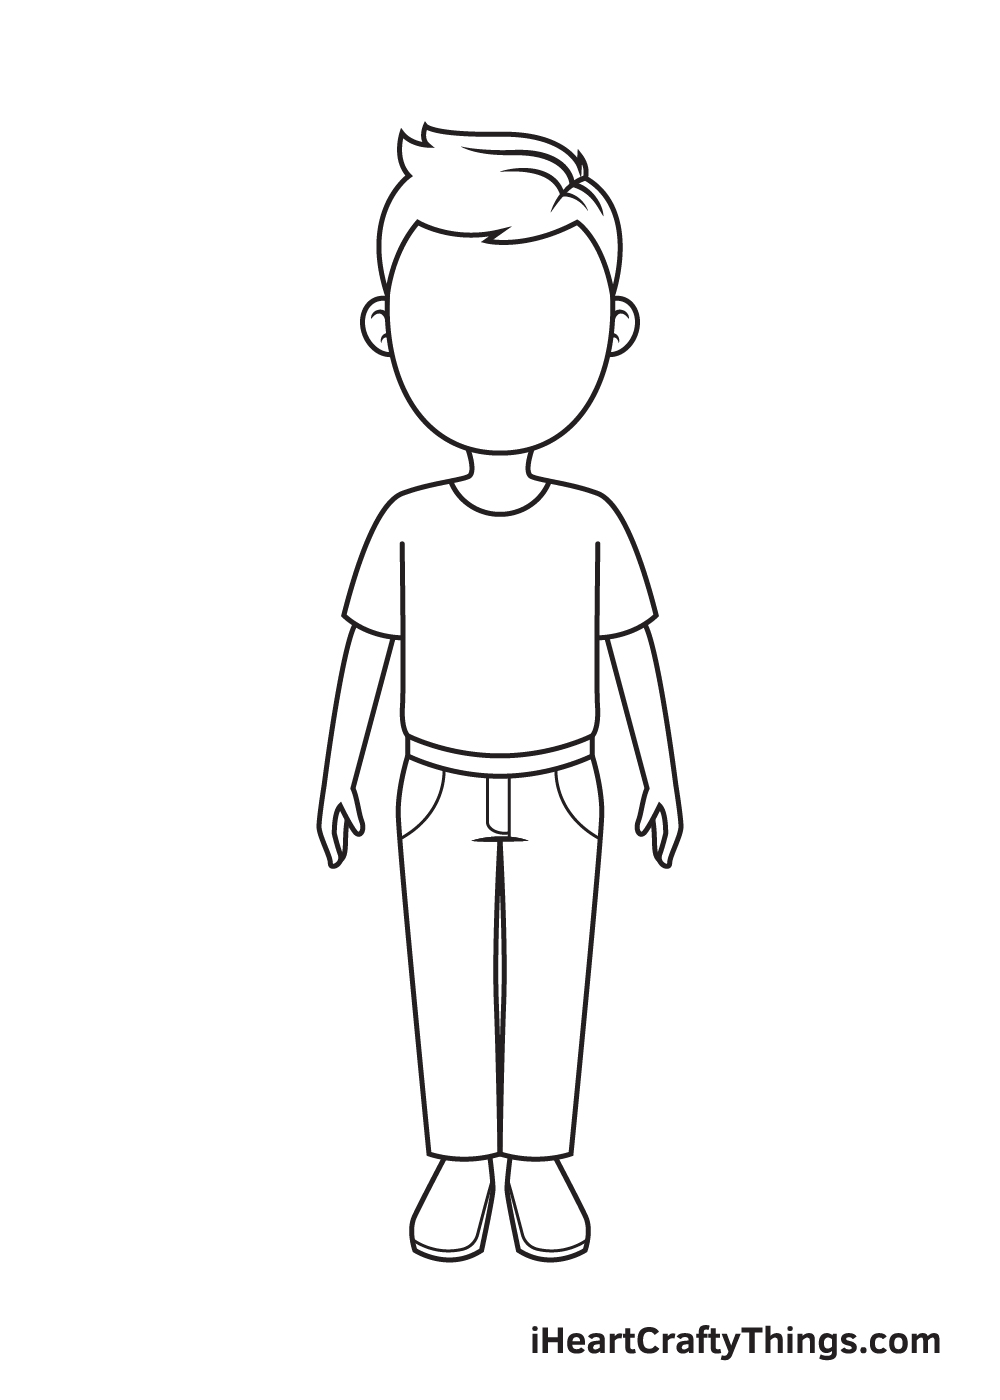 Cartoon People Drawing - How To Draw Cartoon People Step By Step